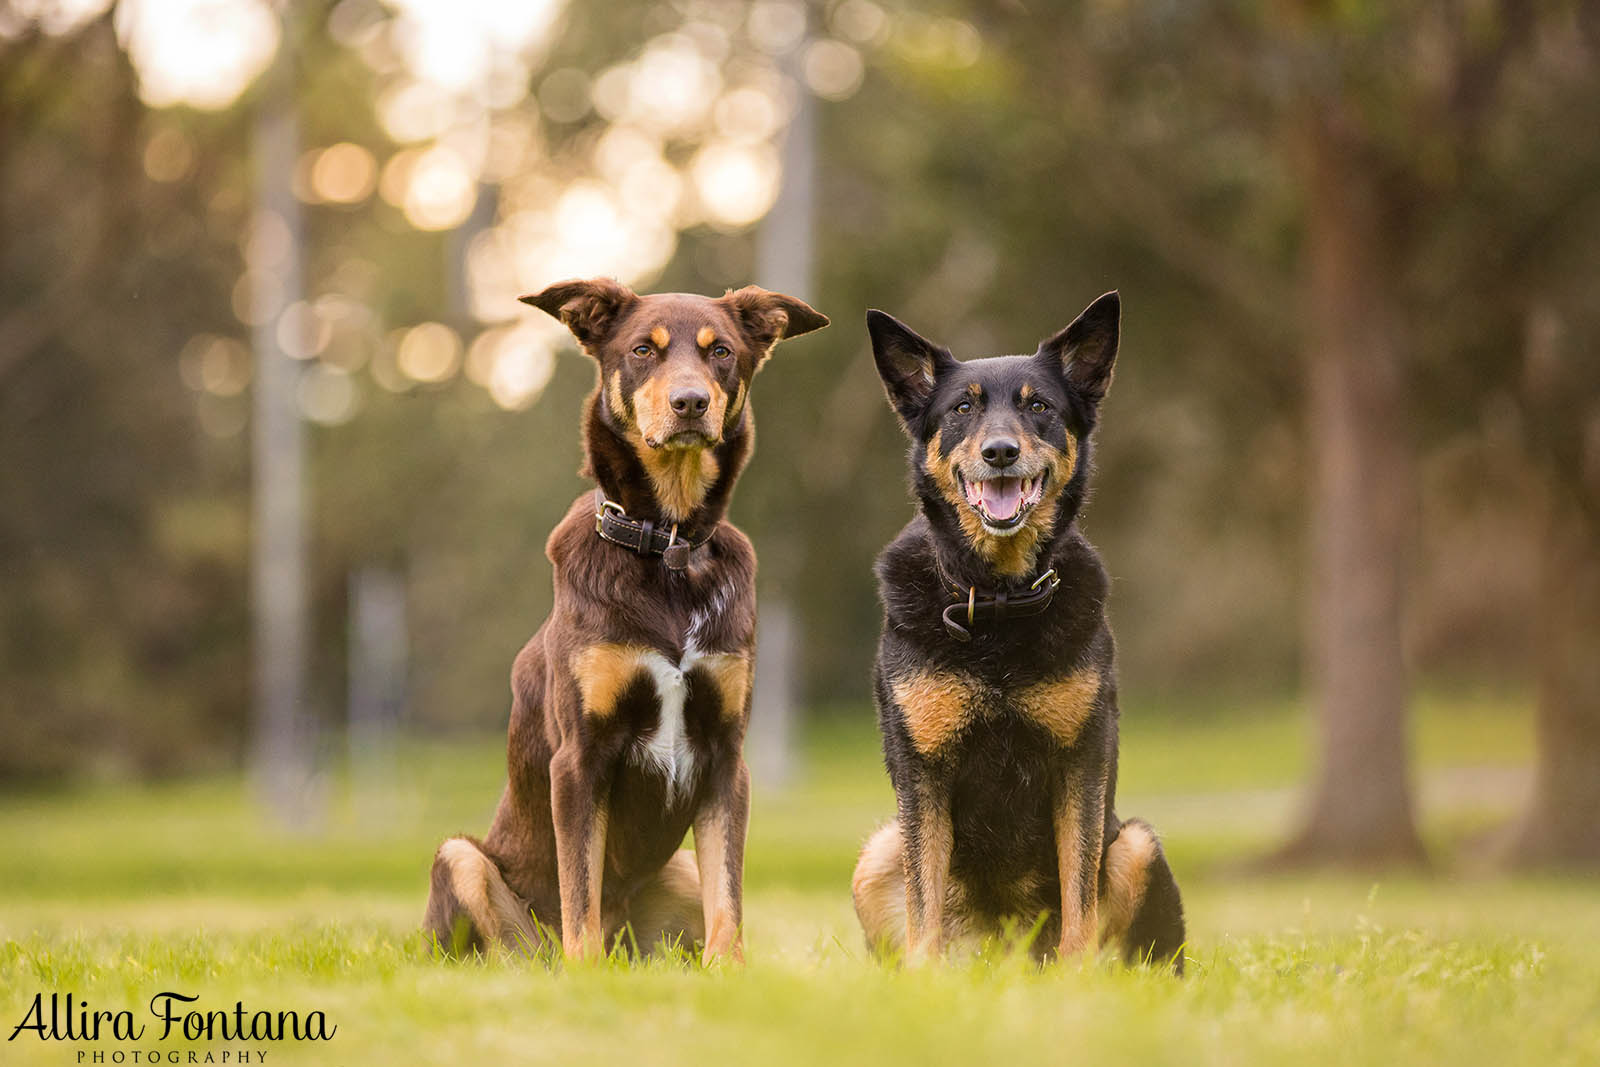 Mack and Pepper's photo session at Centennial Park 